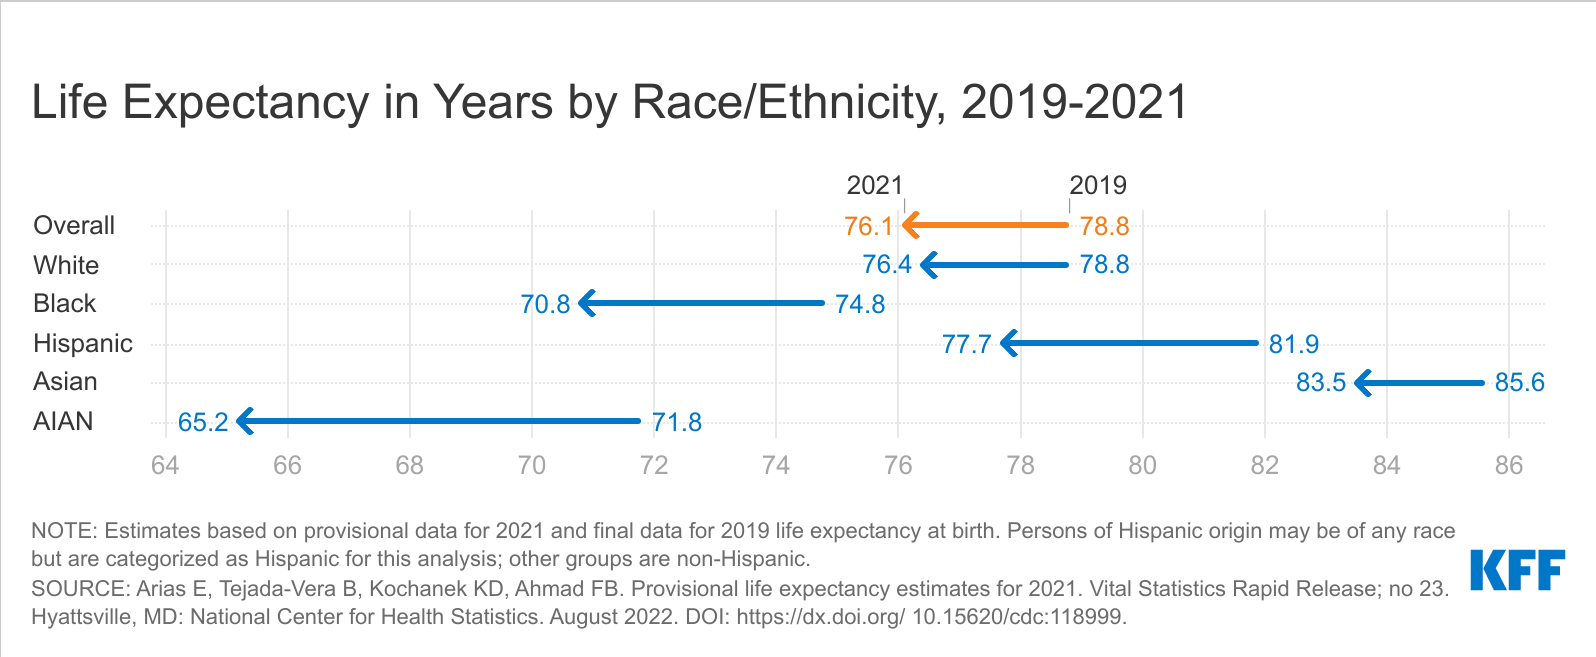 Black older Americans age faster than white counterparts